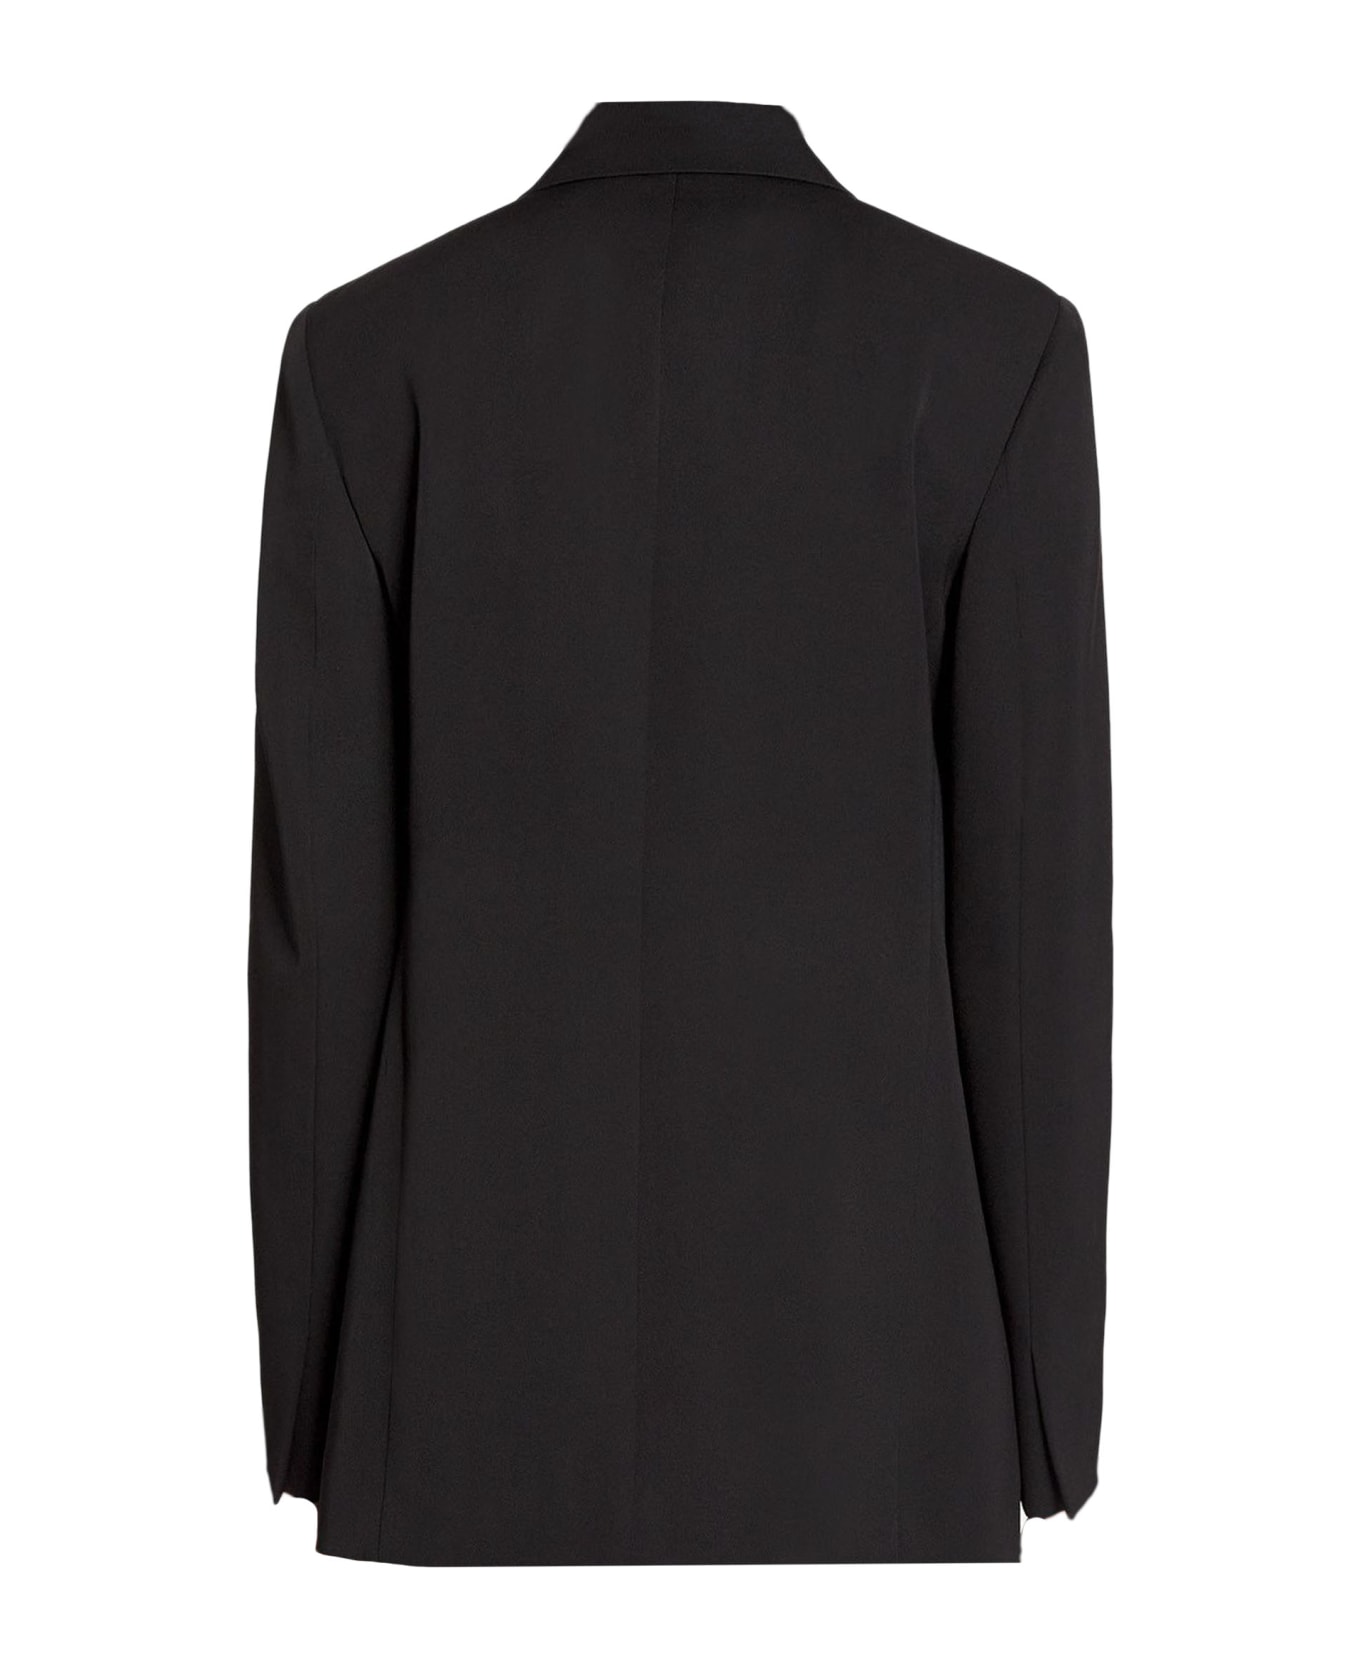 Lanvin Black Double-breasted Jacket - Black ブレザー